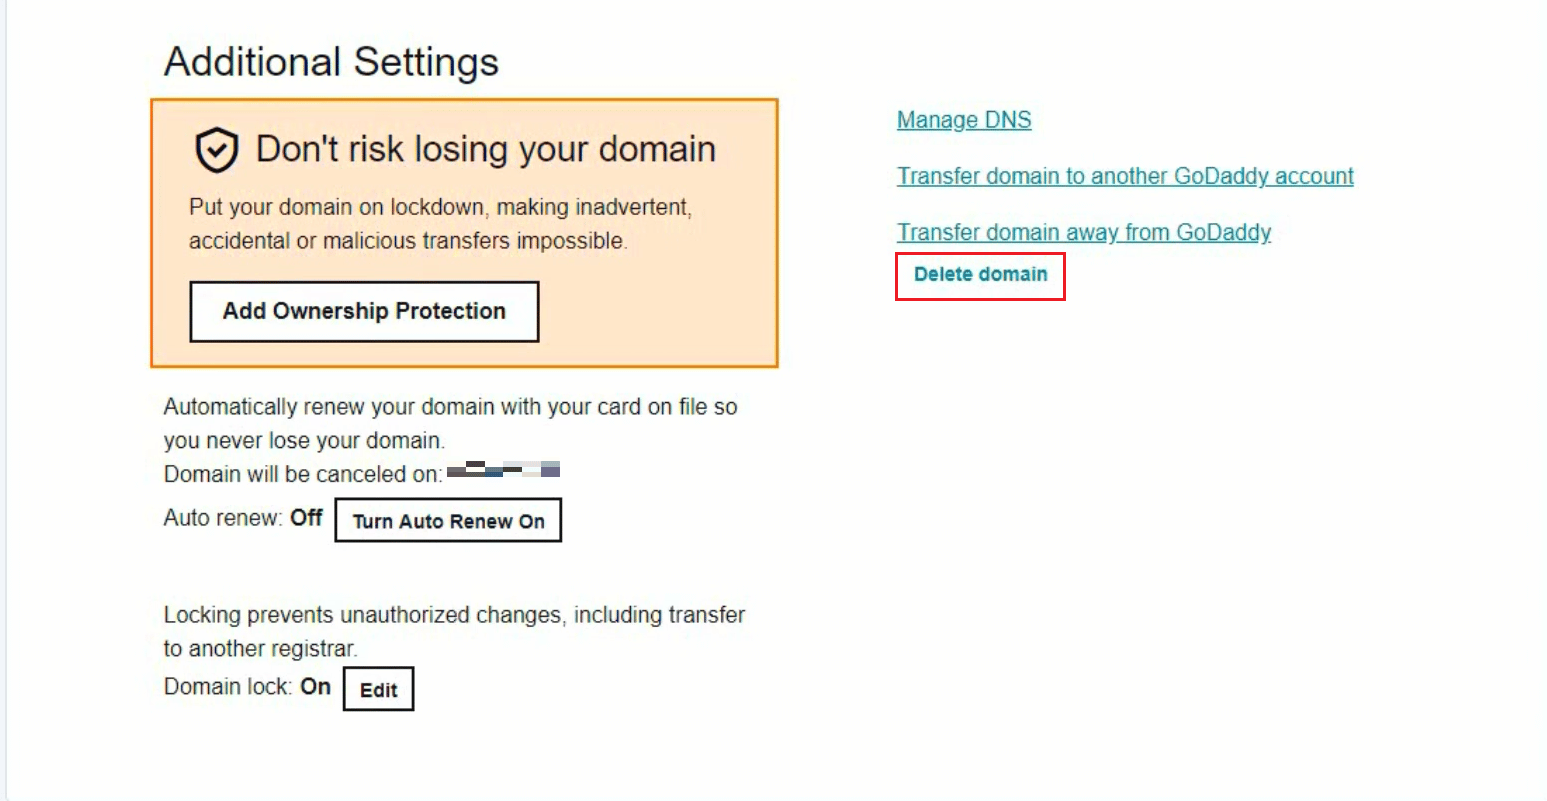 Scroll down to the bottom and click on the Delete domain option from the Additional settings section | How to Delete a Product on GoDaddy